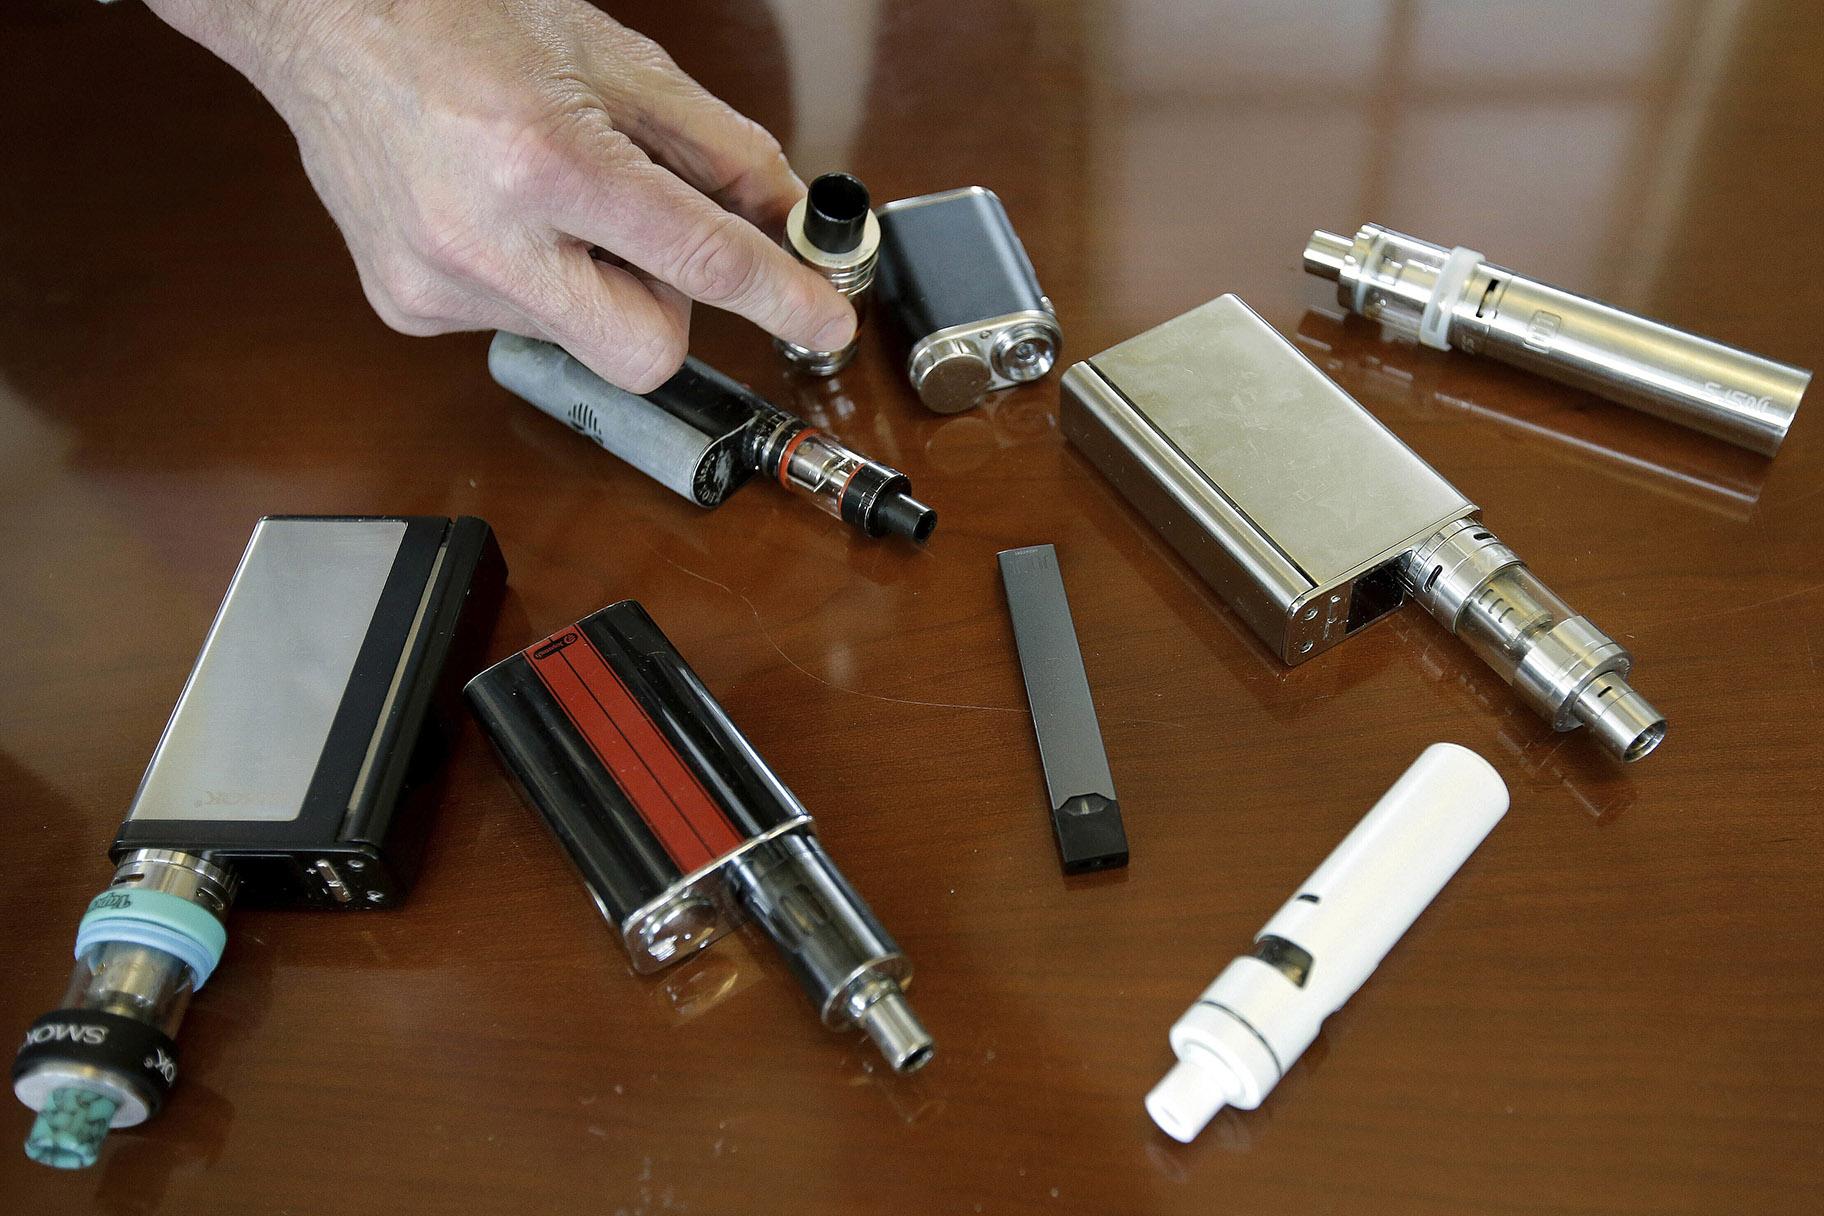 In this Tuesday, April 10, 2018 photo, a high school principal displays vaping devices that were confiscated from students at the school in Massachusetts. (AP Photo / Steven Senne)